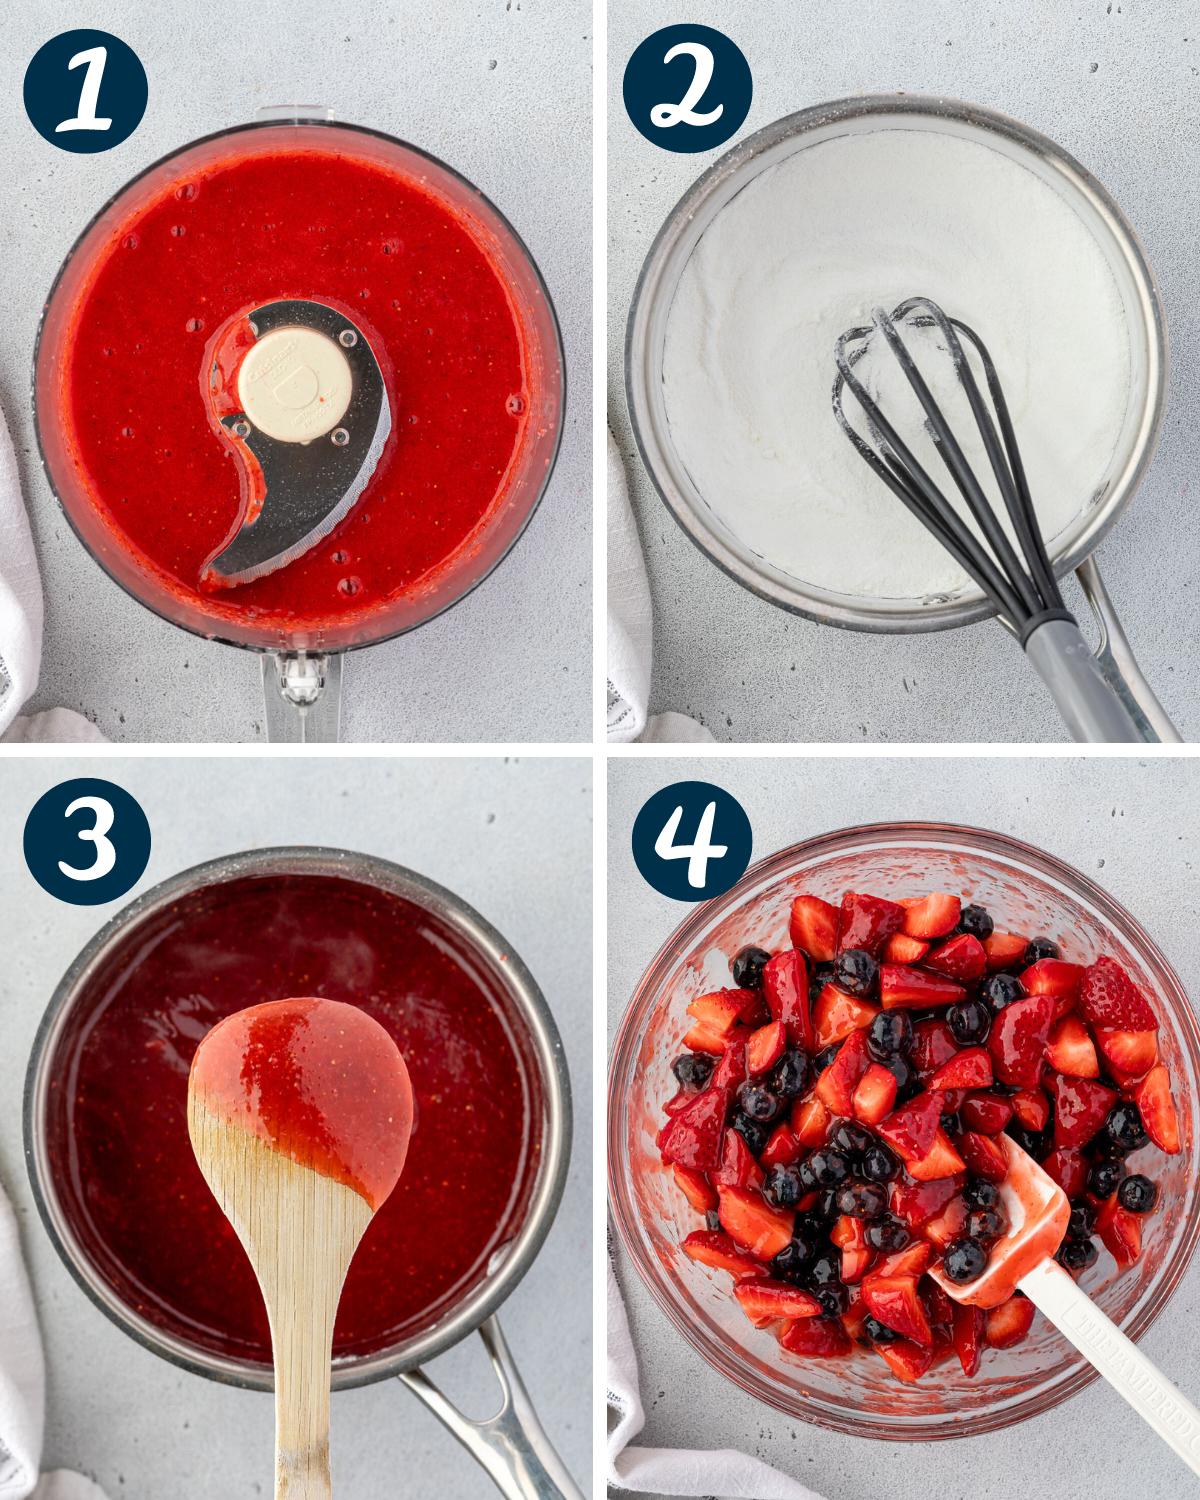 A four-part image showing steps of a recipe: 1) pureed red fruit in a blender, 2) sugar and cornstarch in a bowl with a whisk, 3) stirring a red sauce with a wooden spoon, and 4) mixed fruits in a bowl.